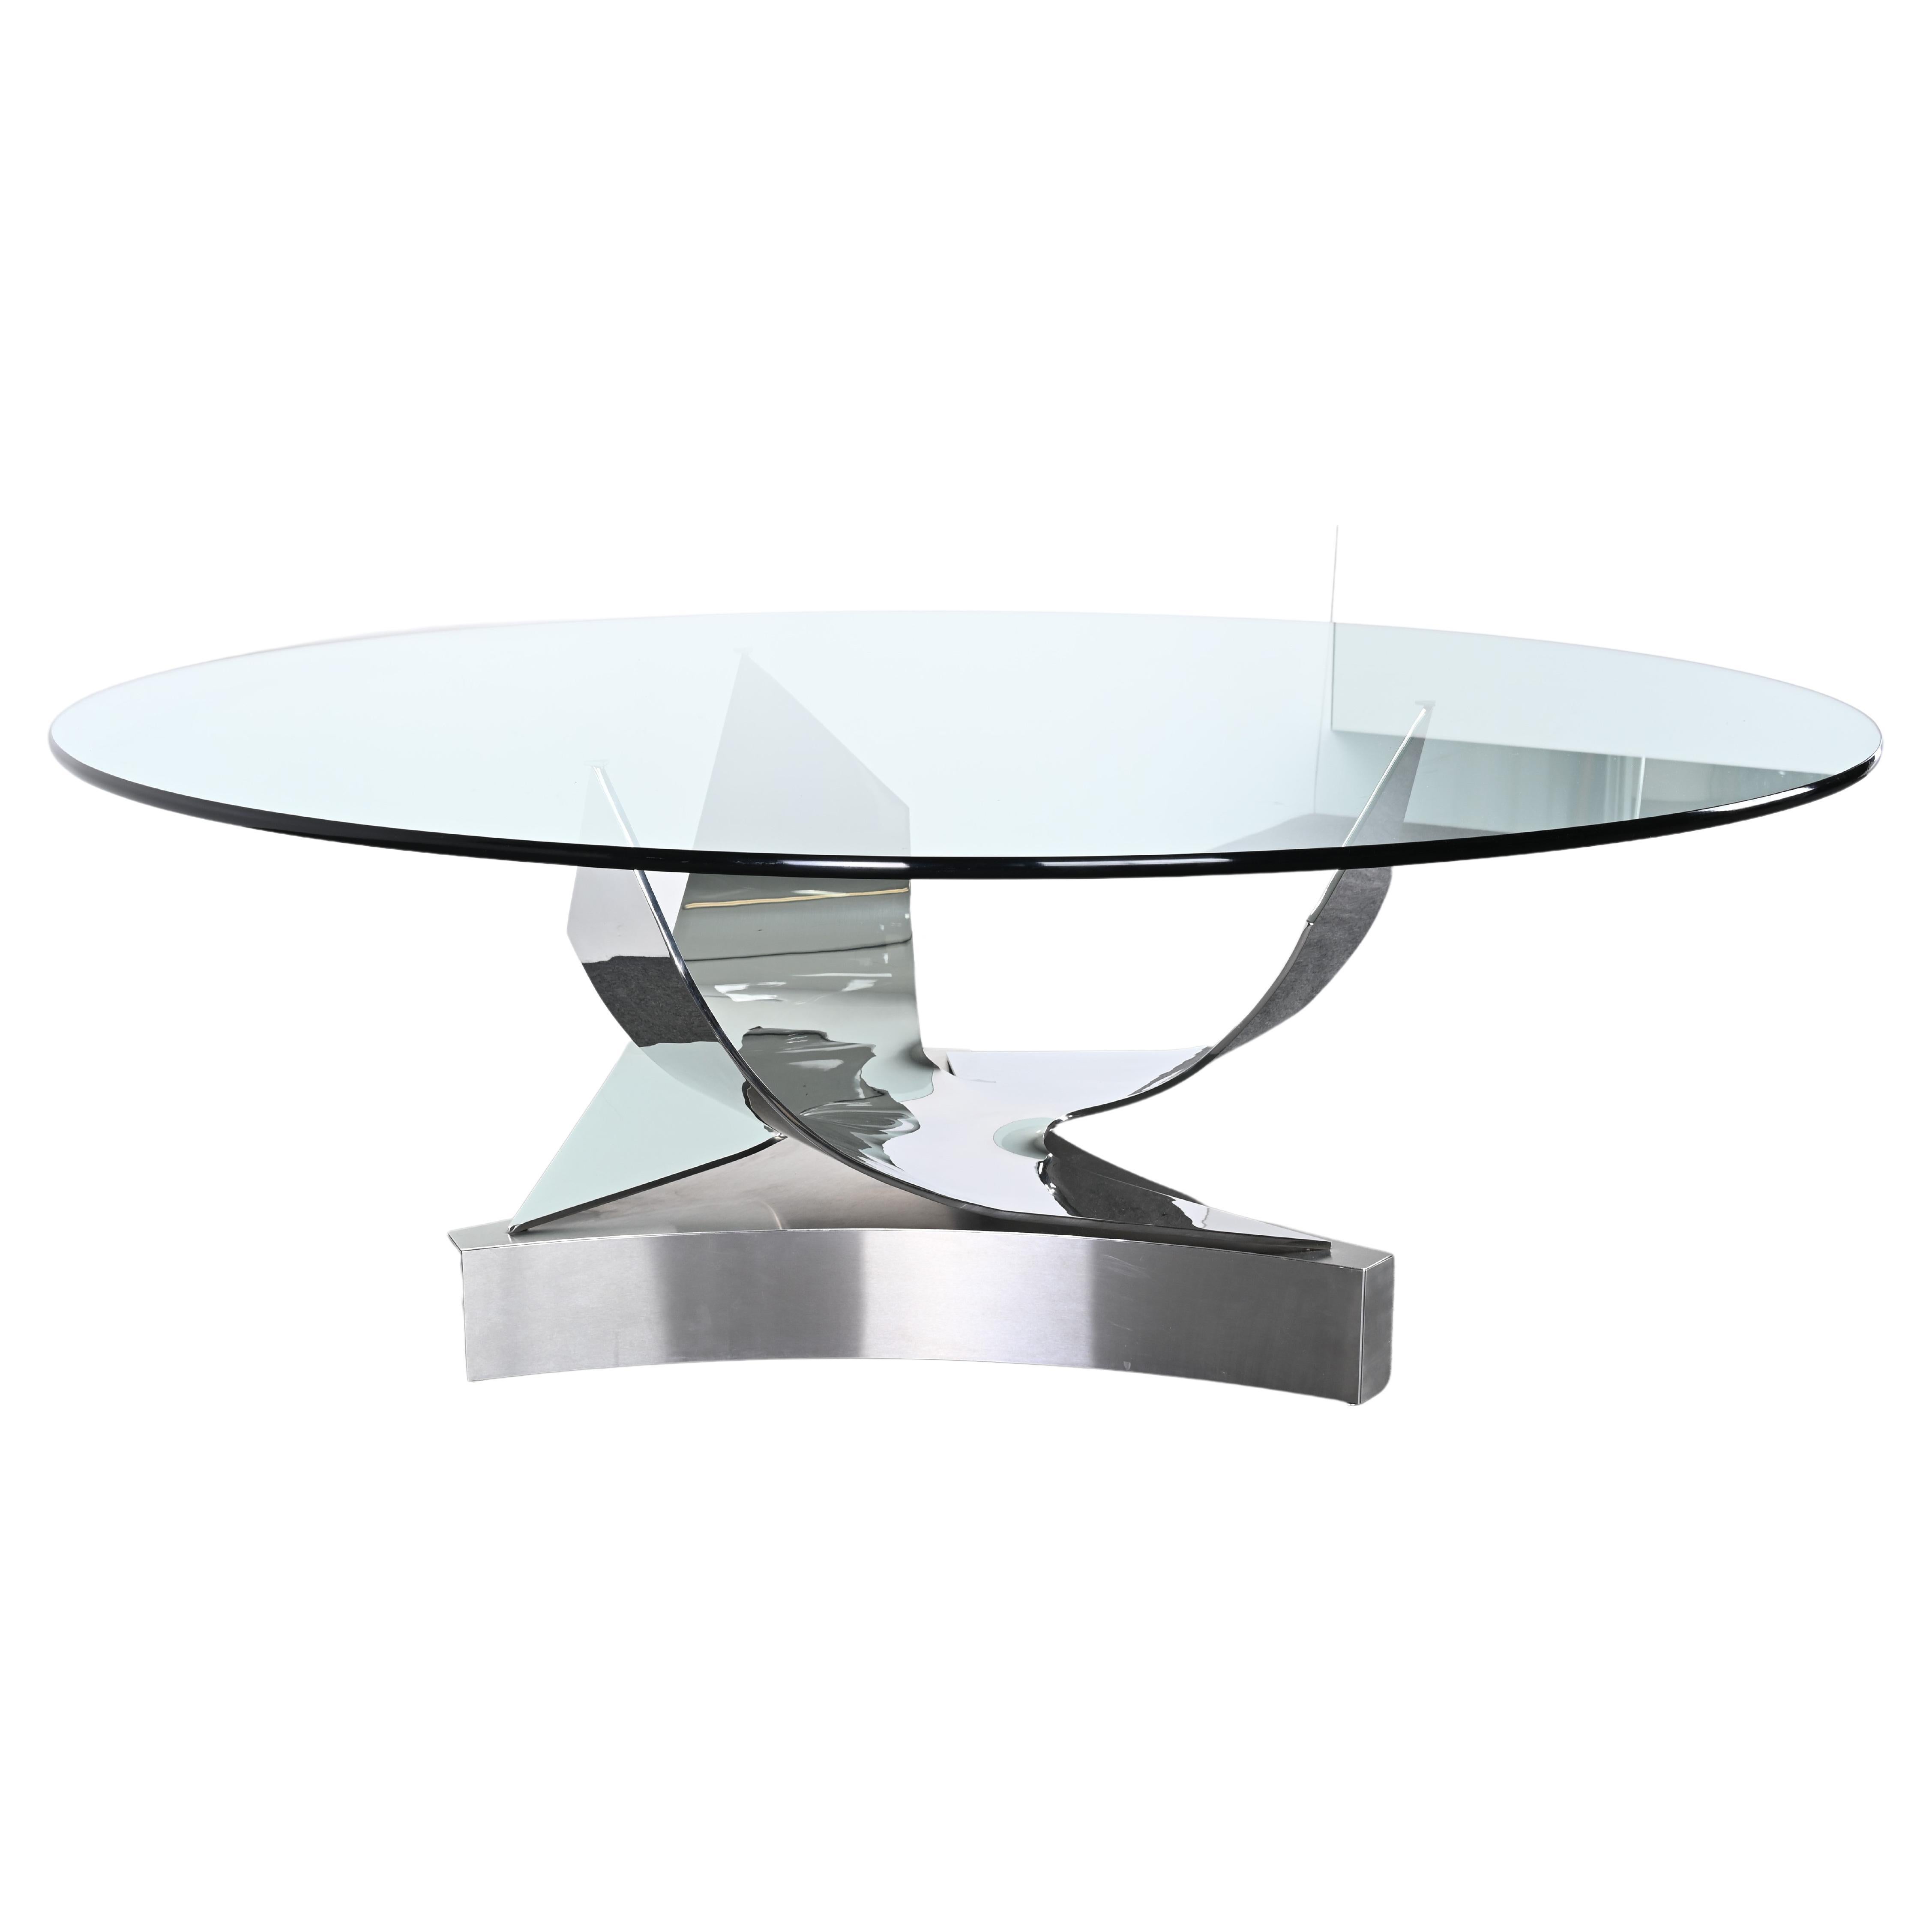 "Coronet Dining Table" by Ron Seff LTD, New York, 20th Century For Sale